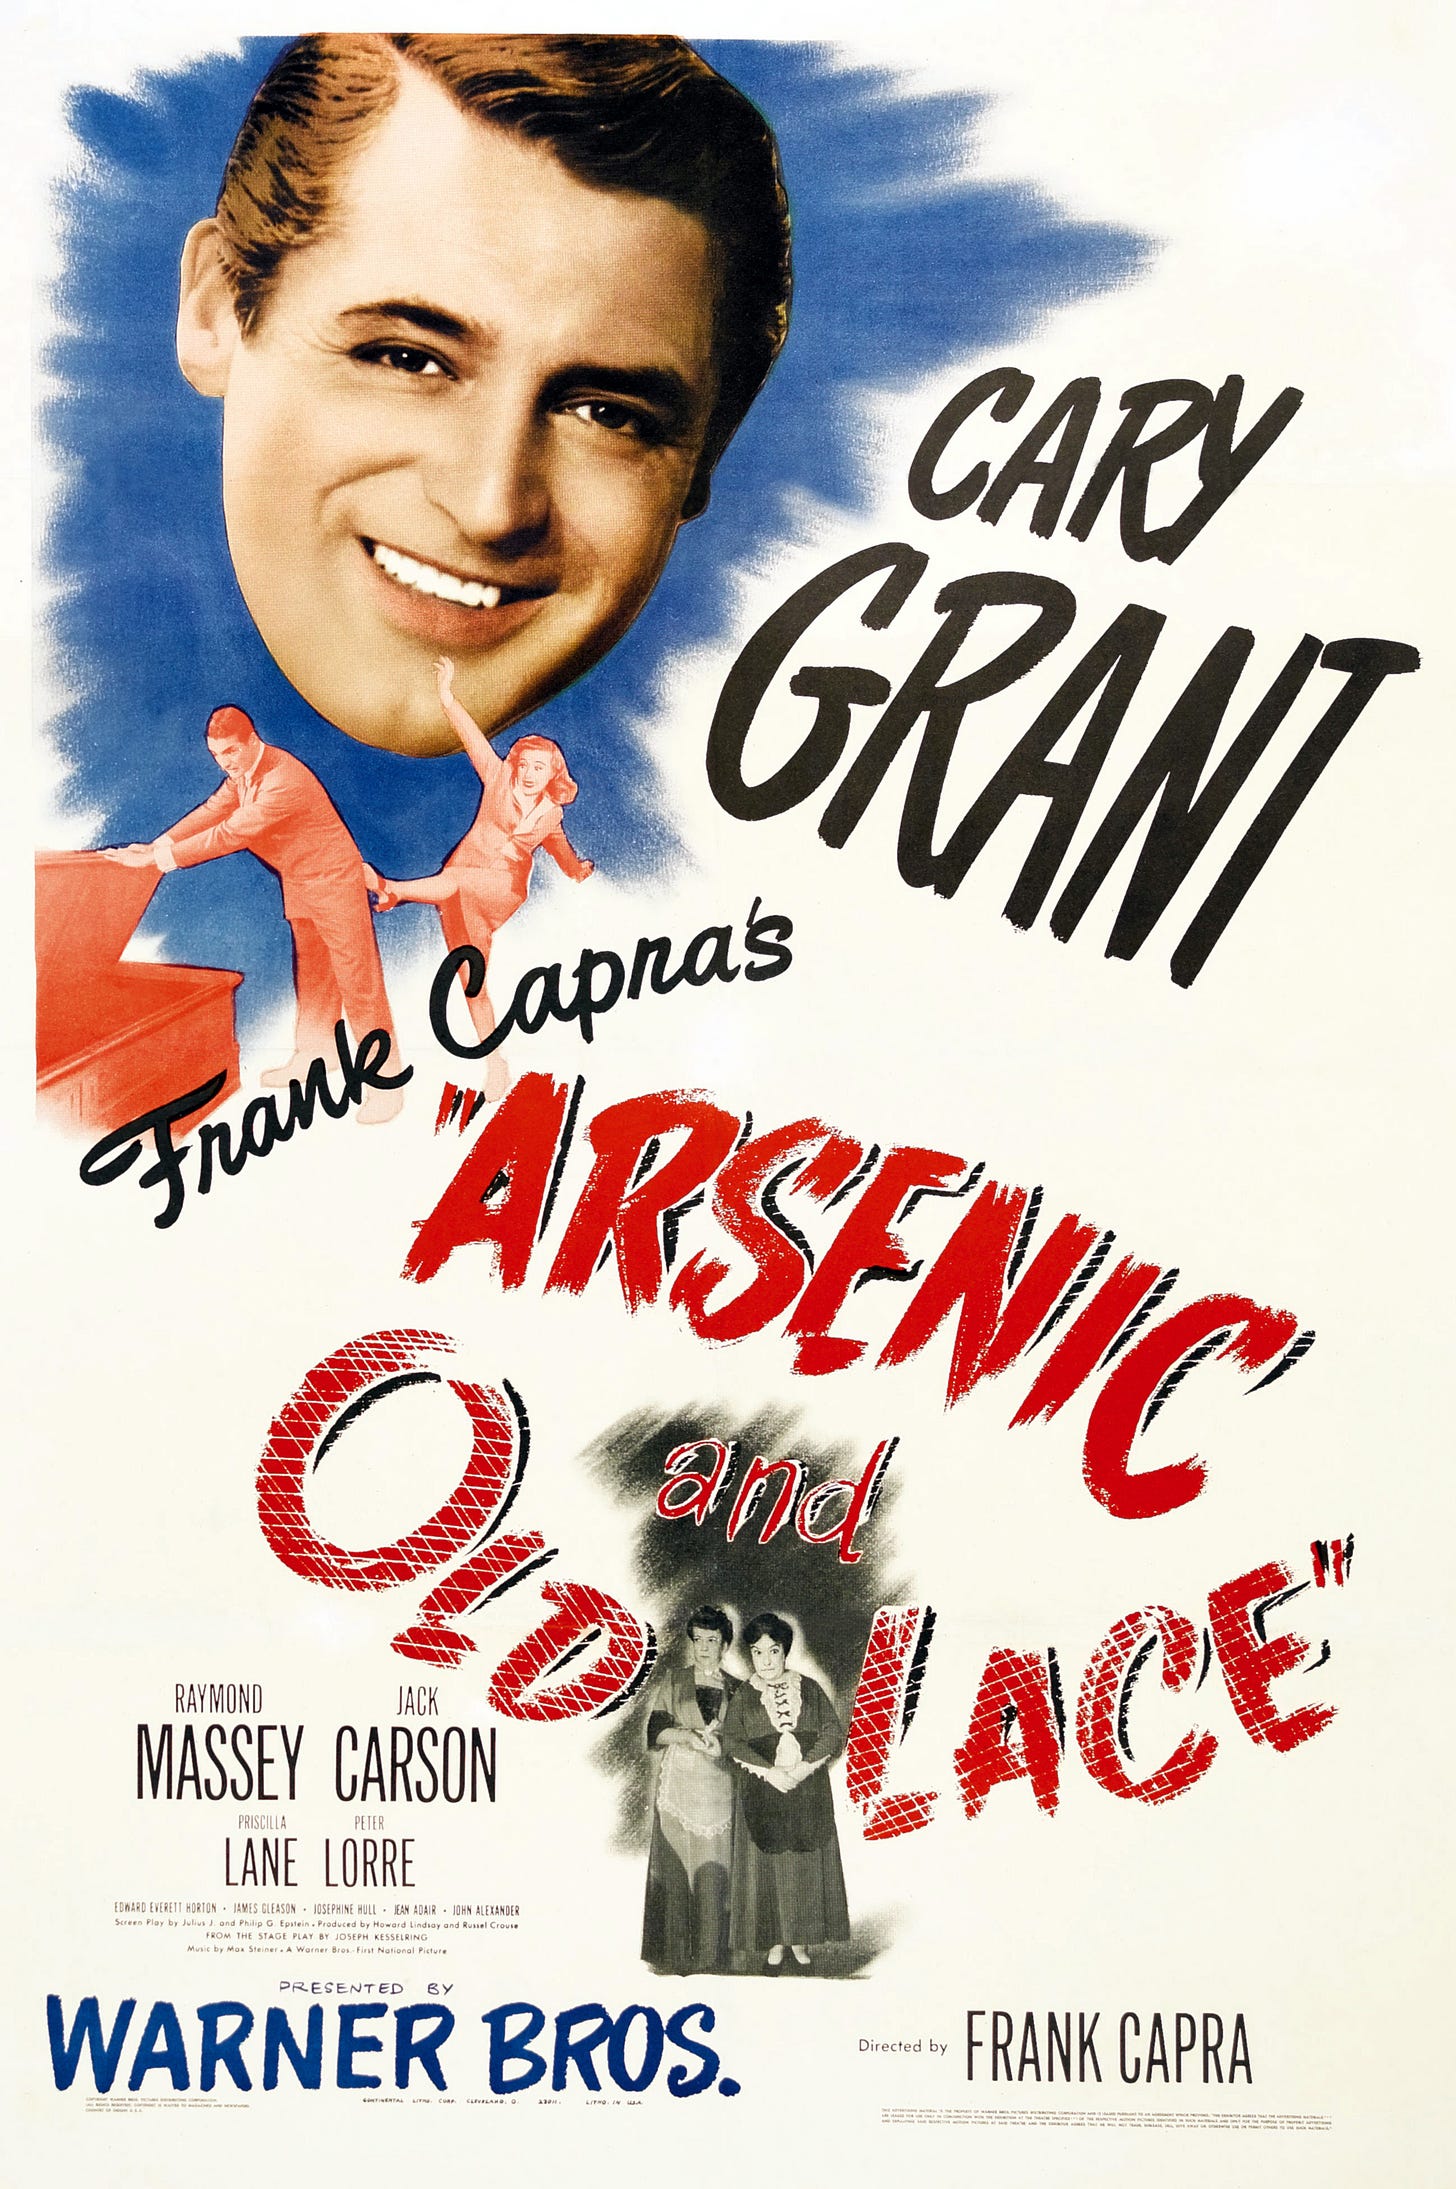 Arsenic and old lace (1944) film poster